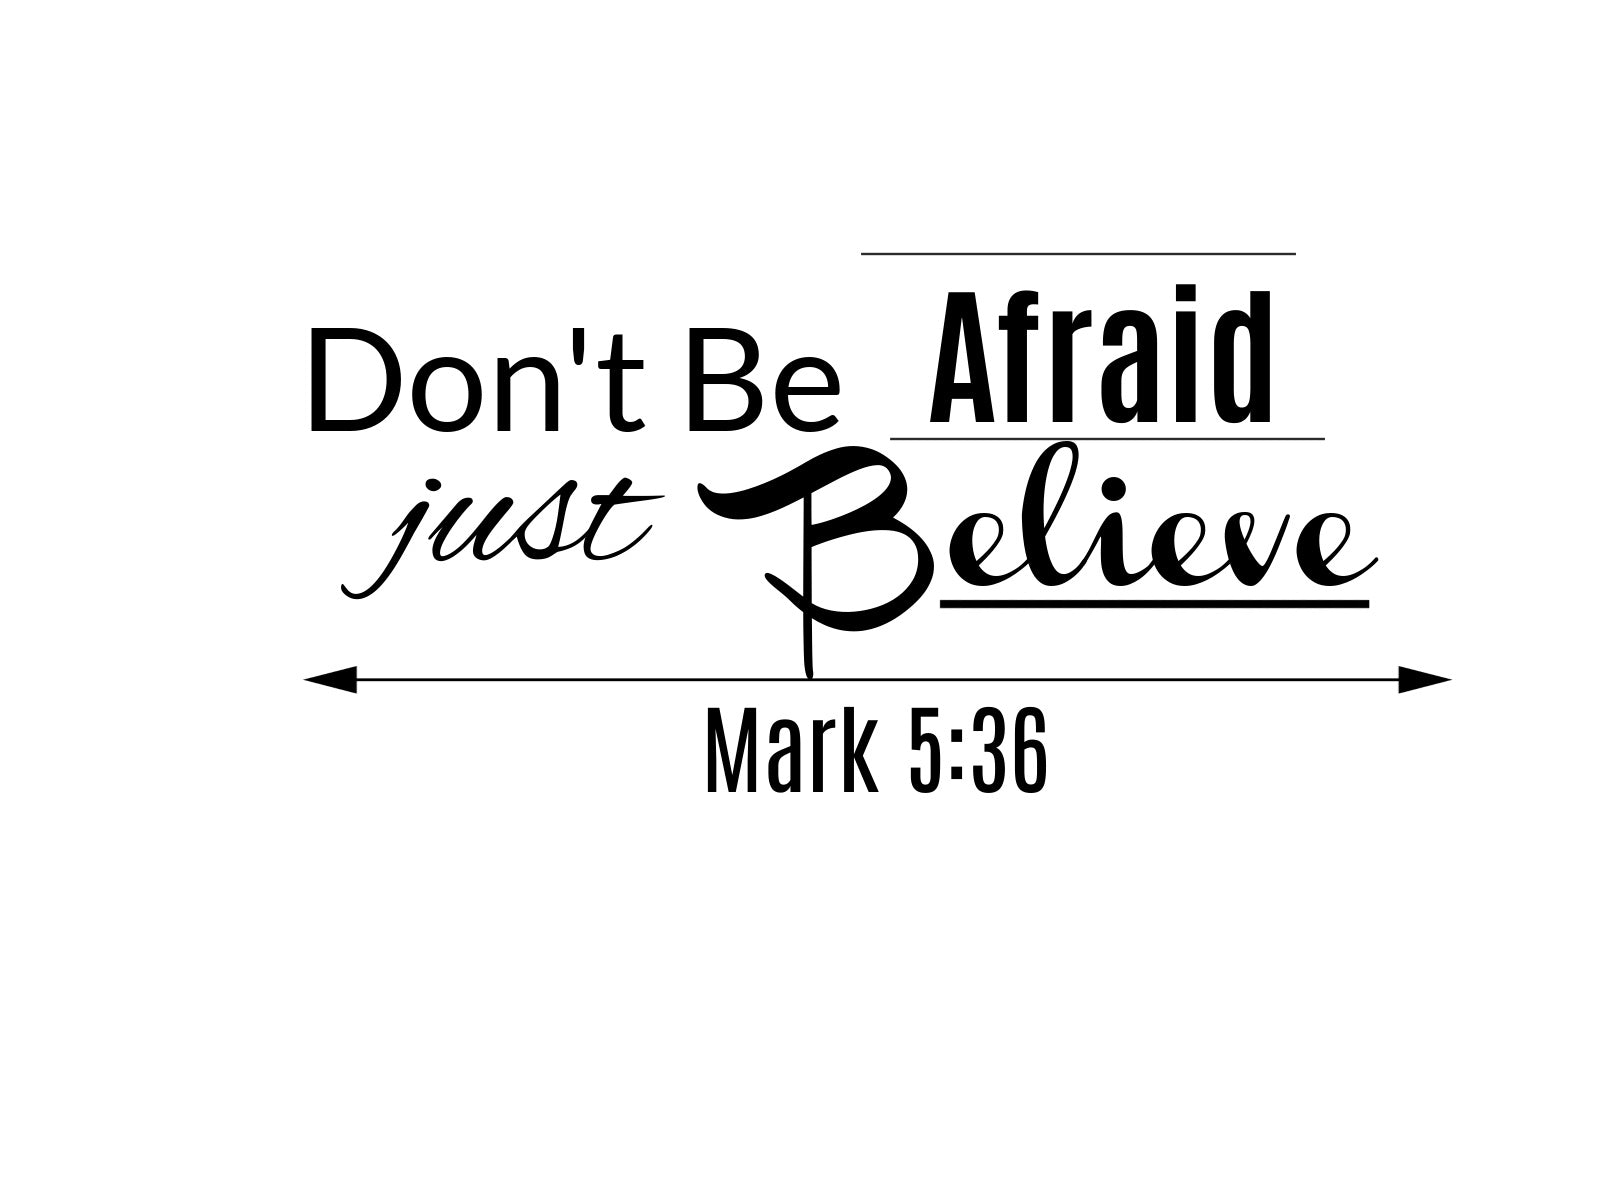 Don't Be Afraid Just Believe Mark 5:36